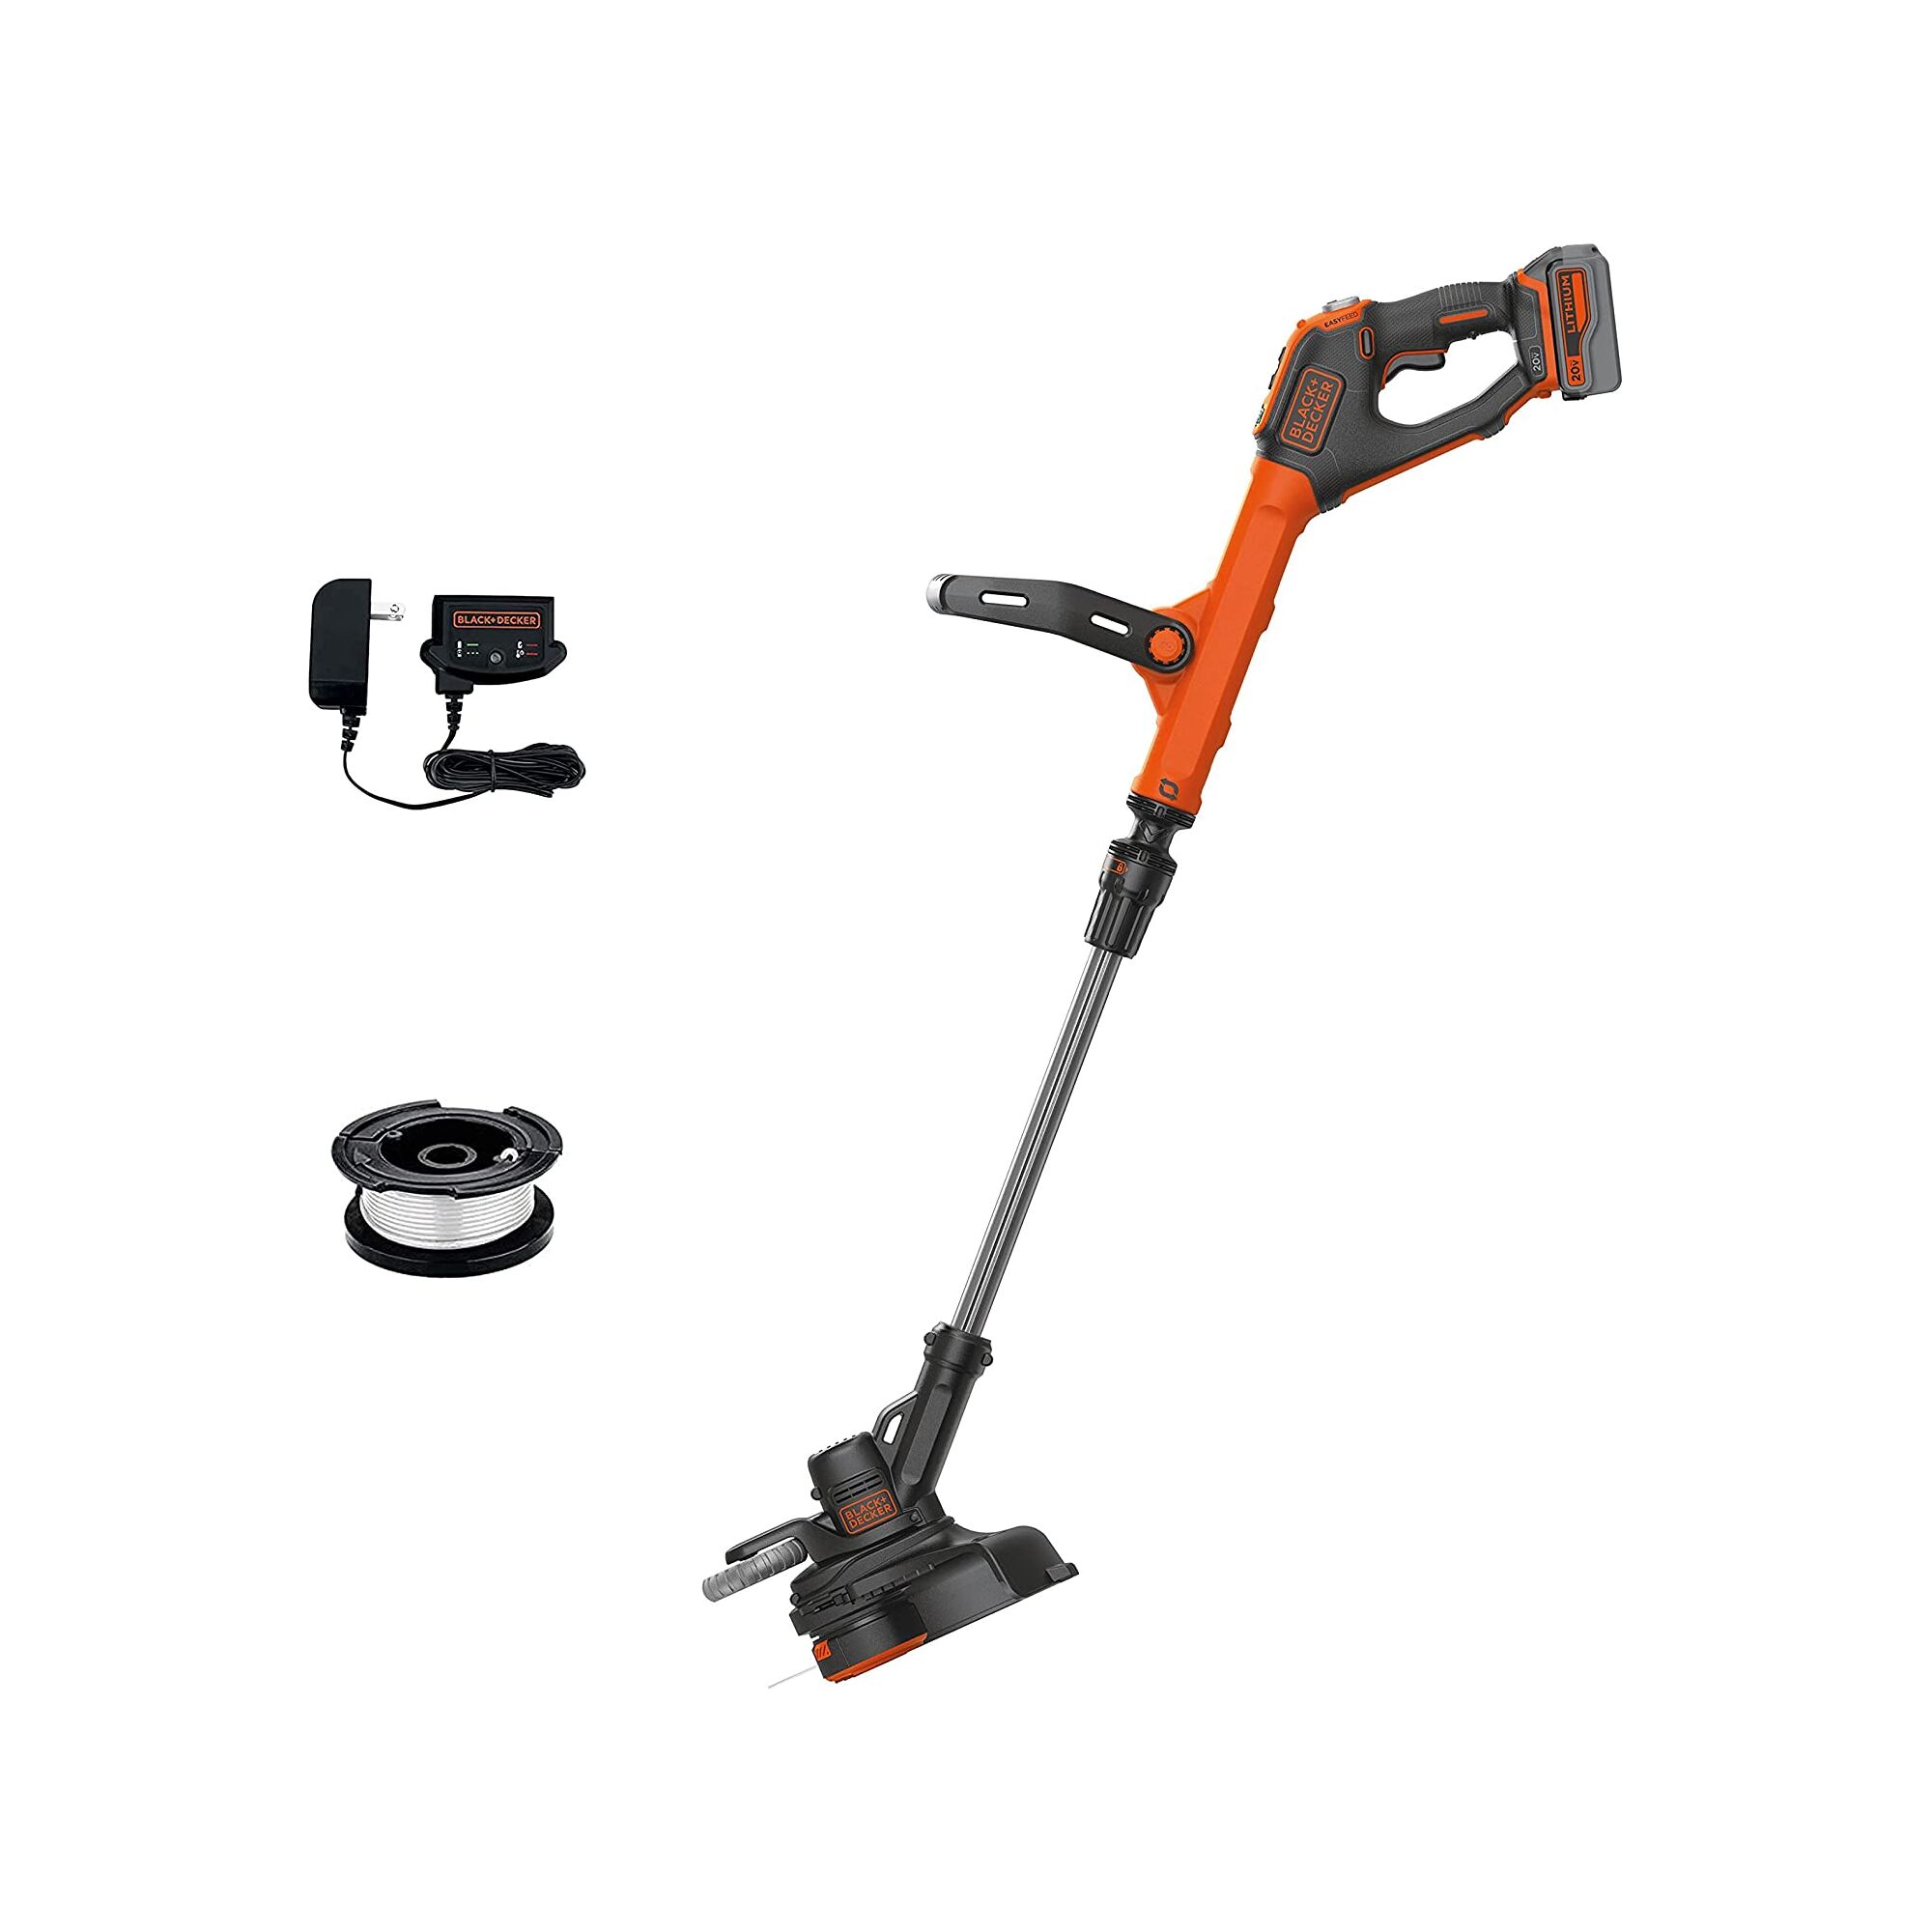 20V MAX Cordless Lithium-Ion EASYFEED 2-Speed 12 in. String Trimmer/Edger Kit - image 3 of 13